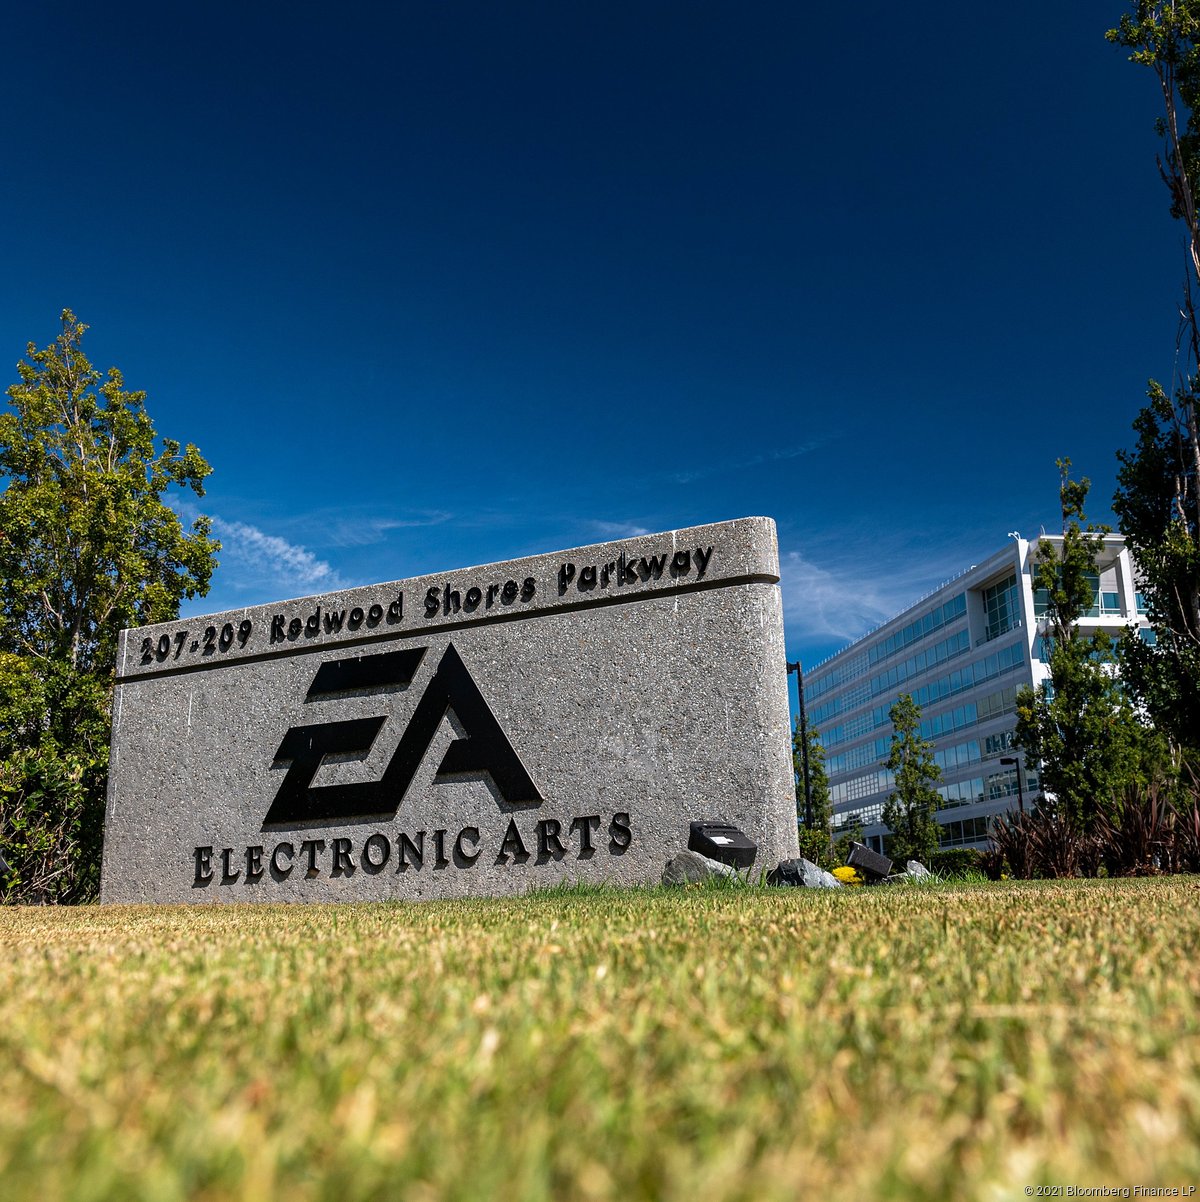 EA's It Takes Two Wins Best Game of the Year at Game Awards - Bloomberg